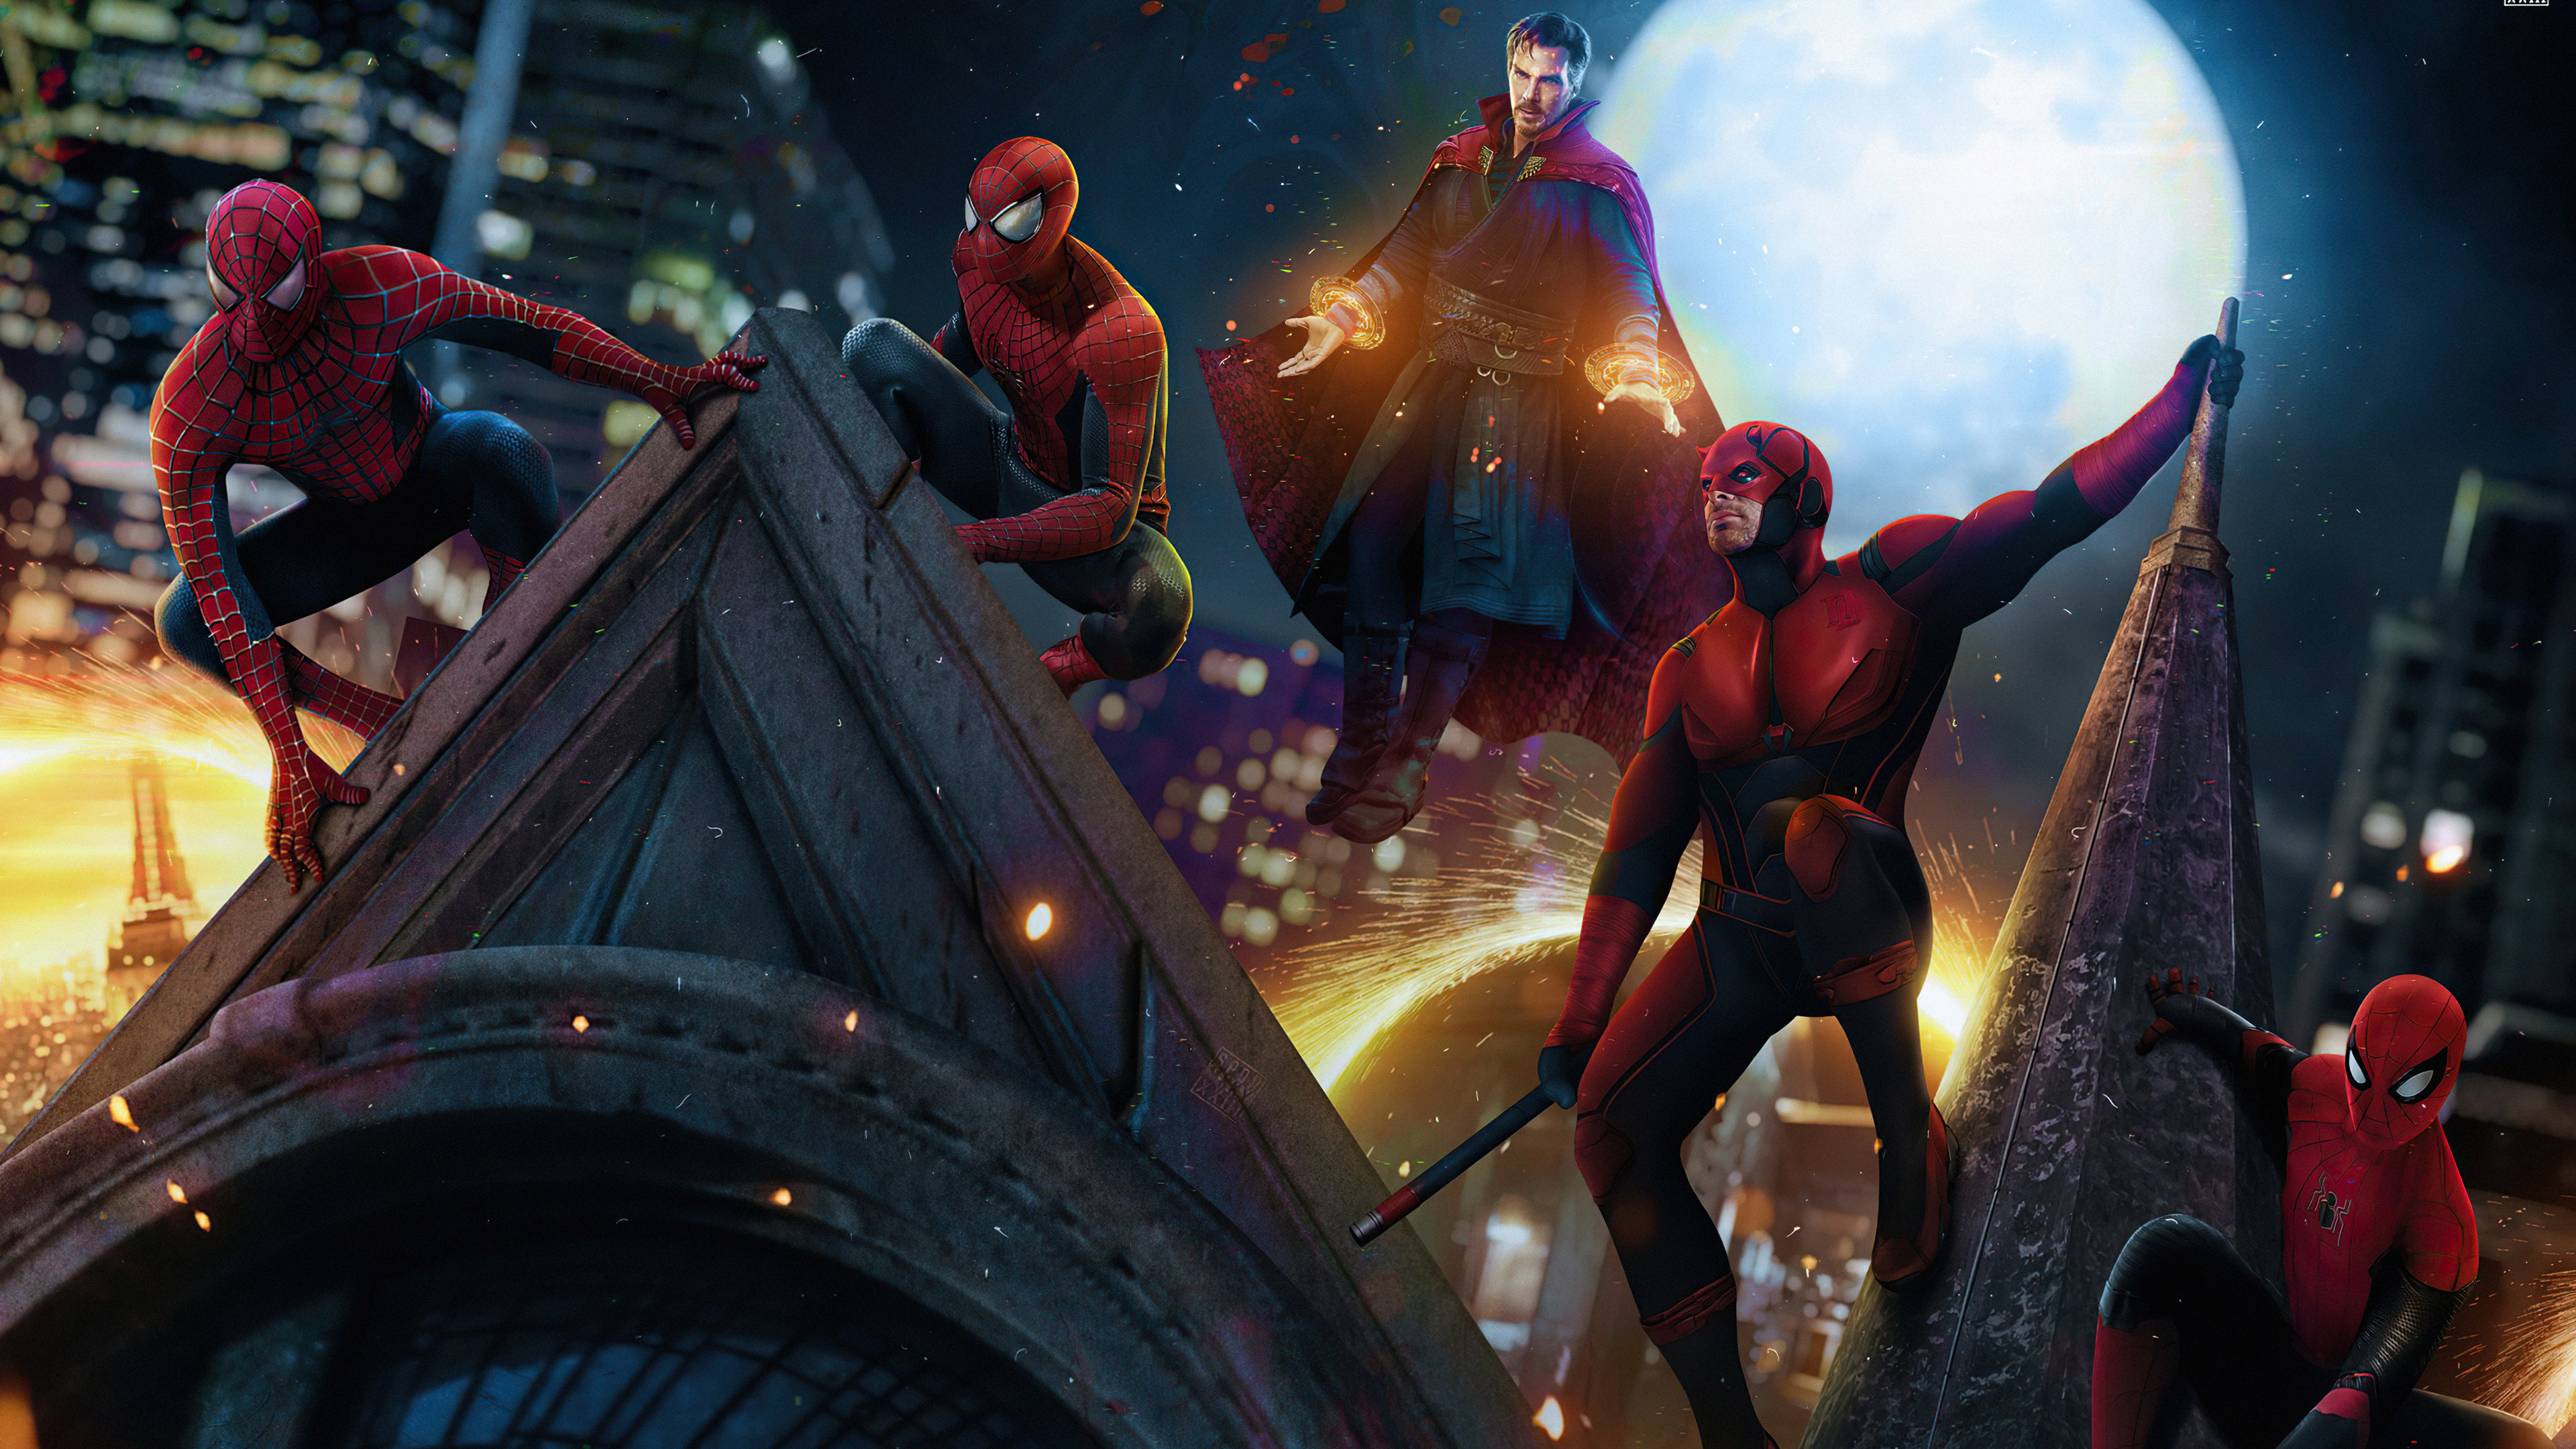 Doctor Strange Dareveil And Spidermans In Spider Man No Way Home 4k, HD Movies, 4k Wallpapers, Image, Backgrounds, Photos and Pictures